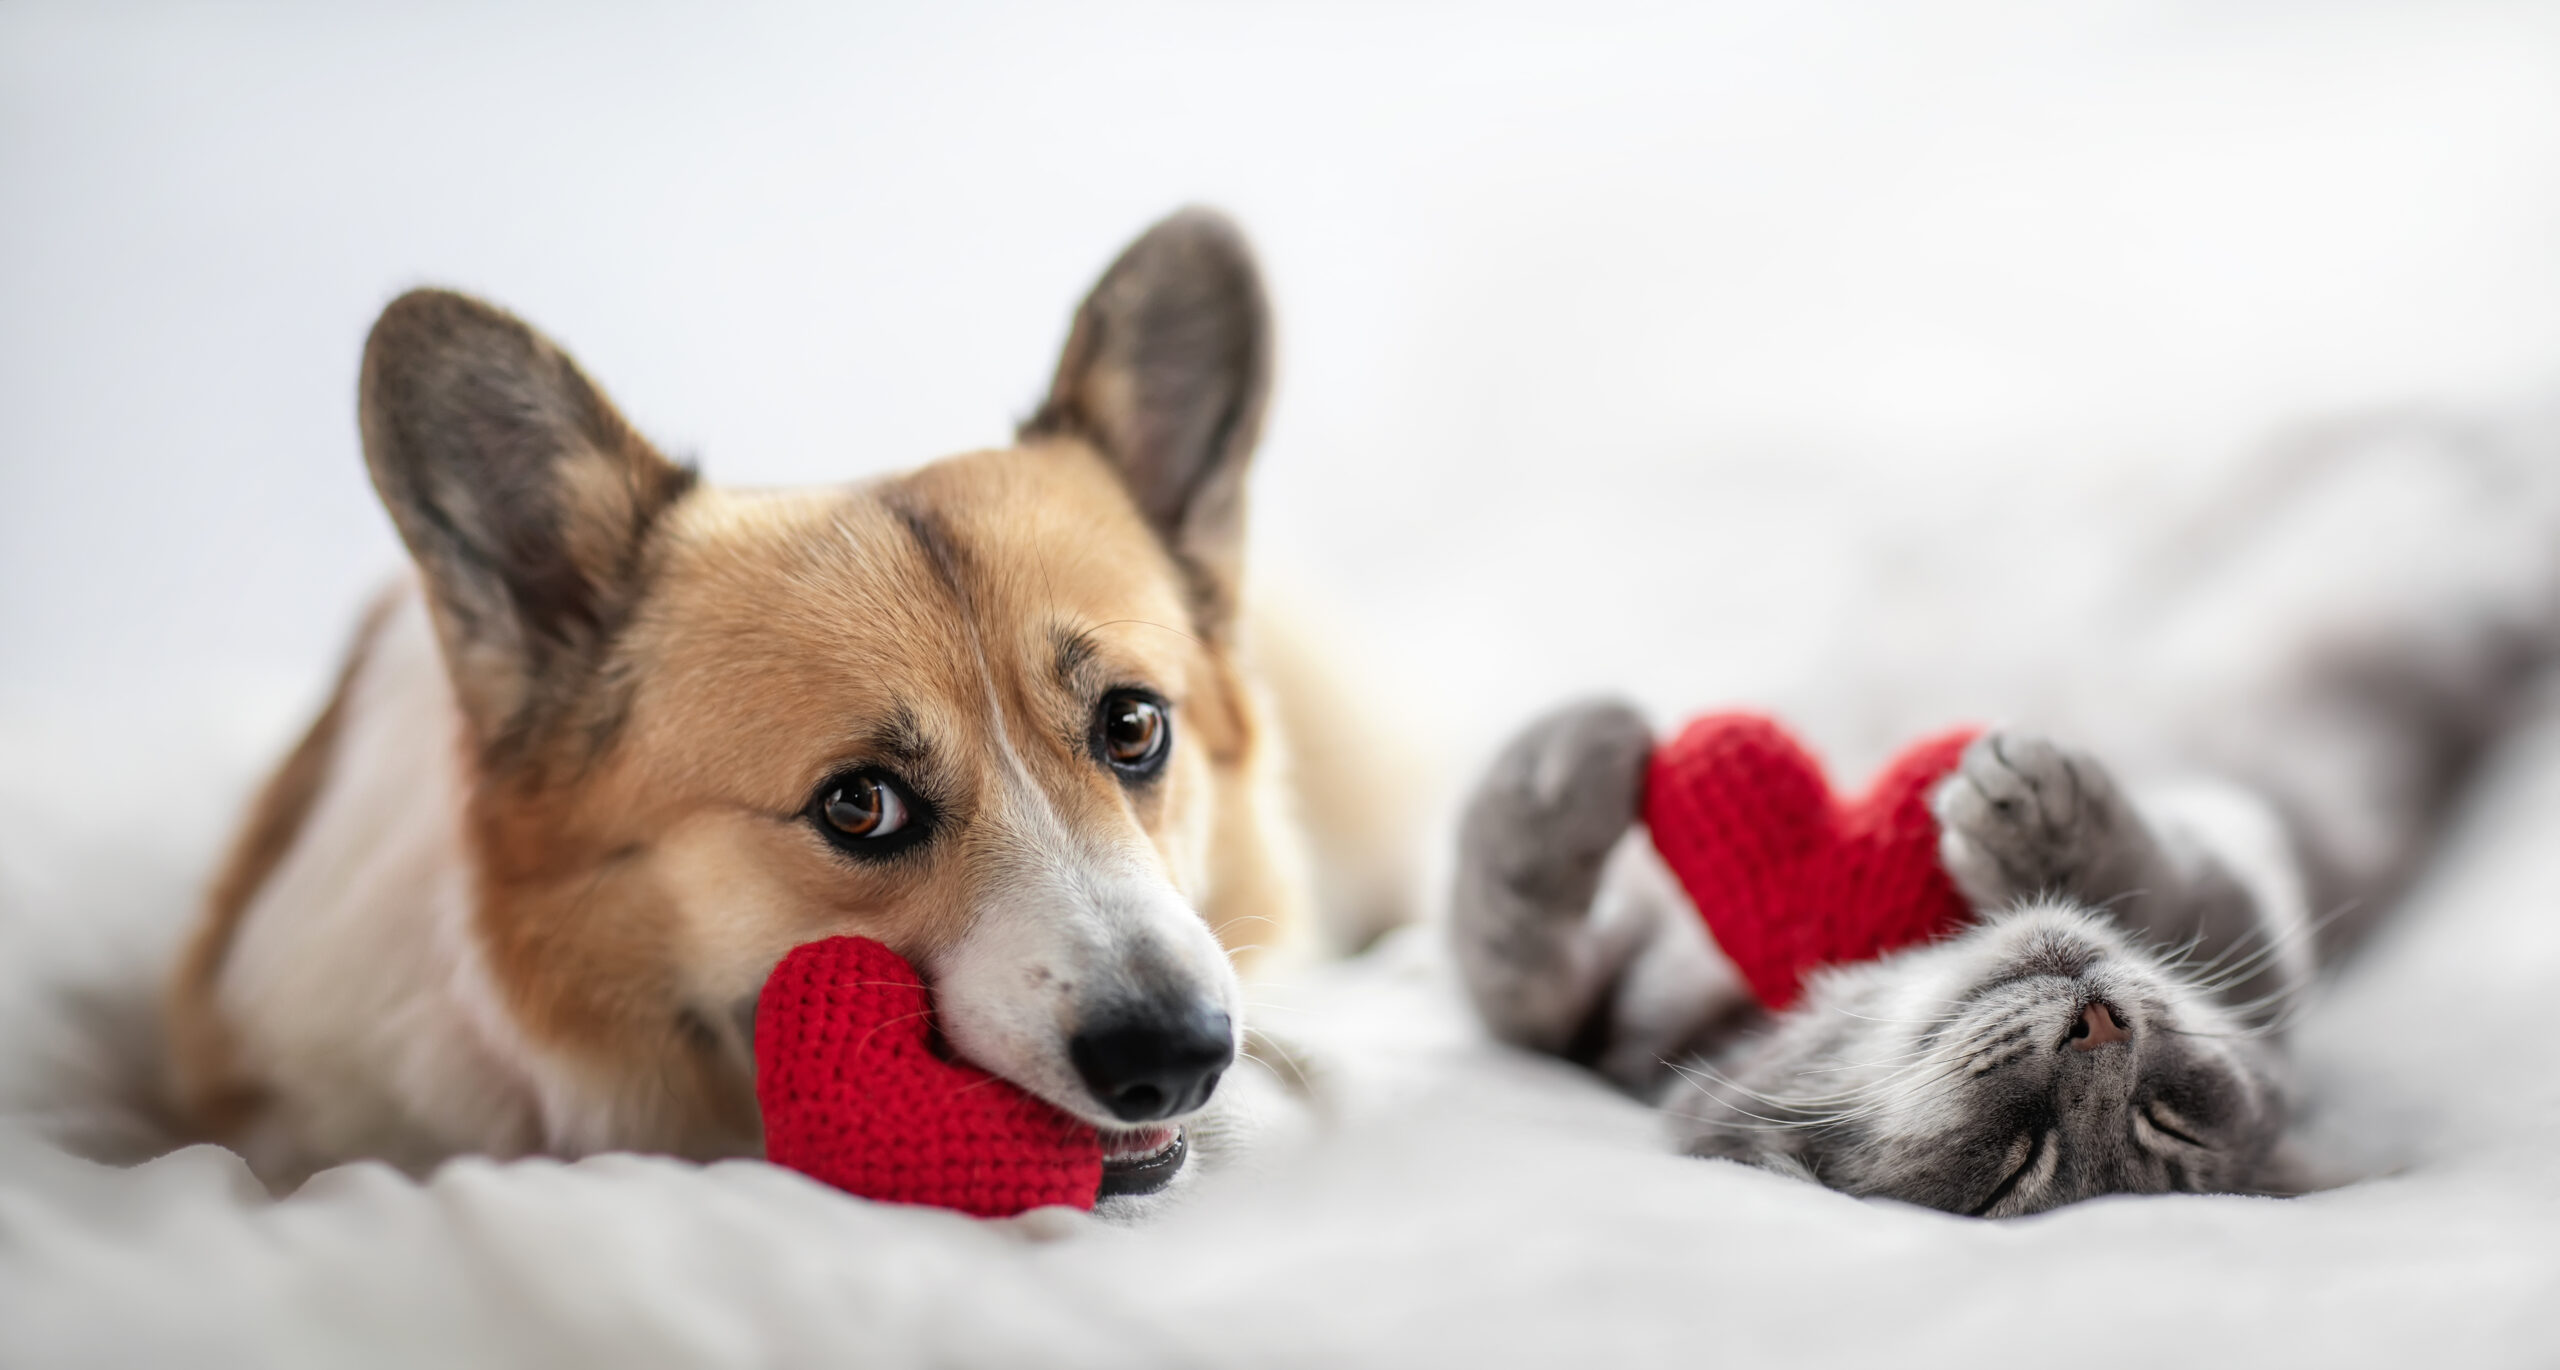 Valentine's holiday card with cute corgi dog and cat lying on a white bed background surrounded by red hearts symbols